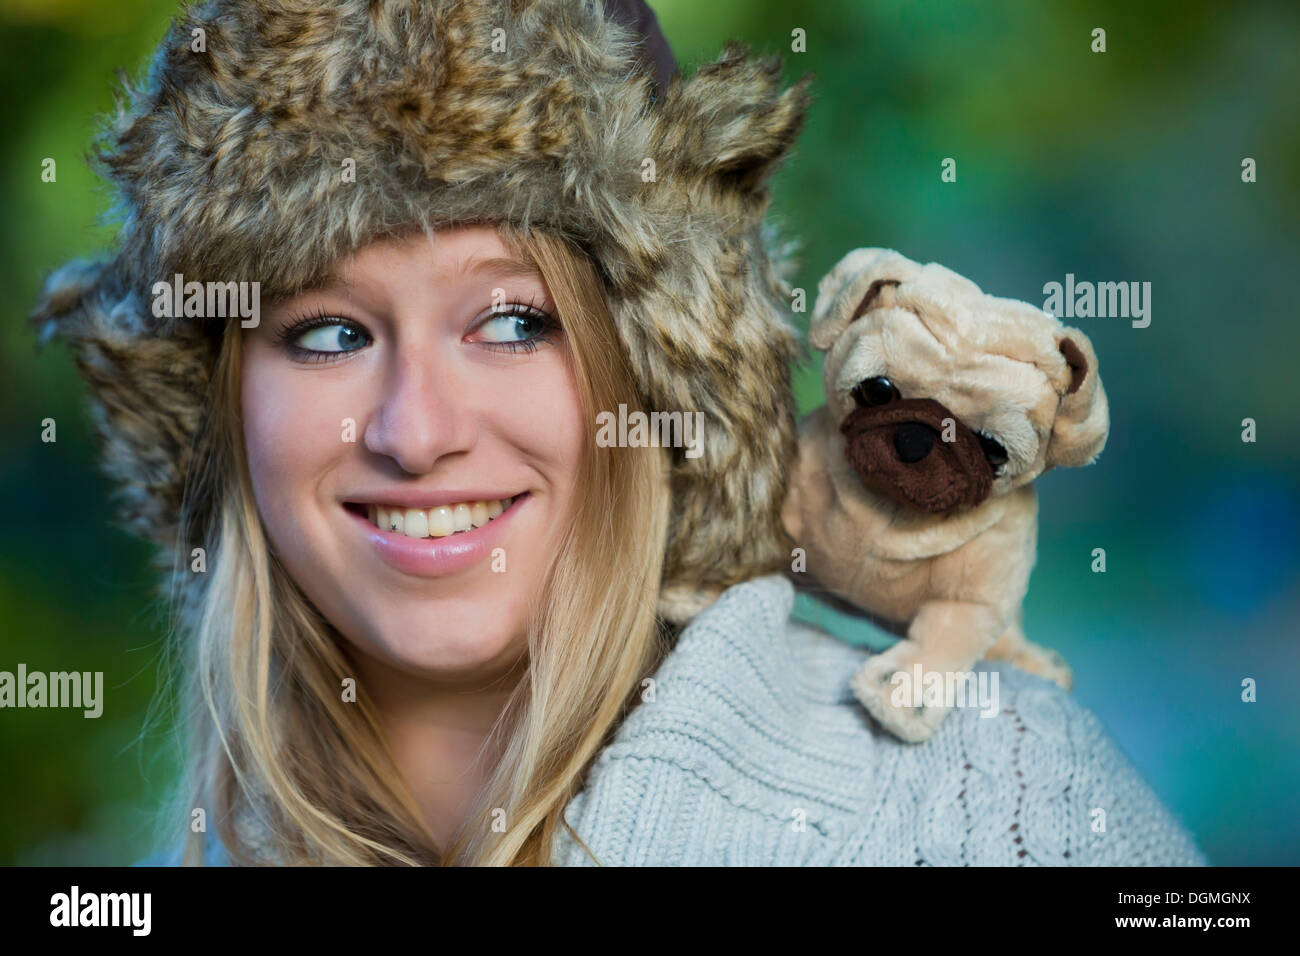 Young woman wearing a fur hat with a plush pug on her shoulder Stock Photo